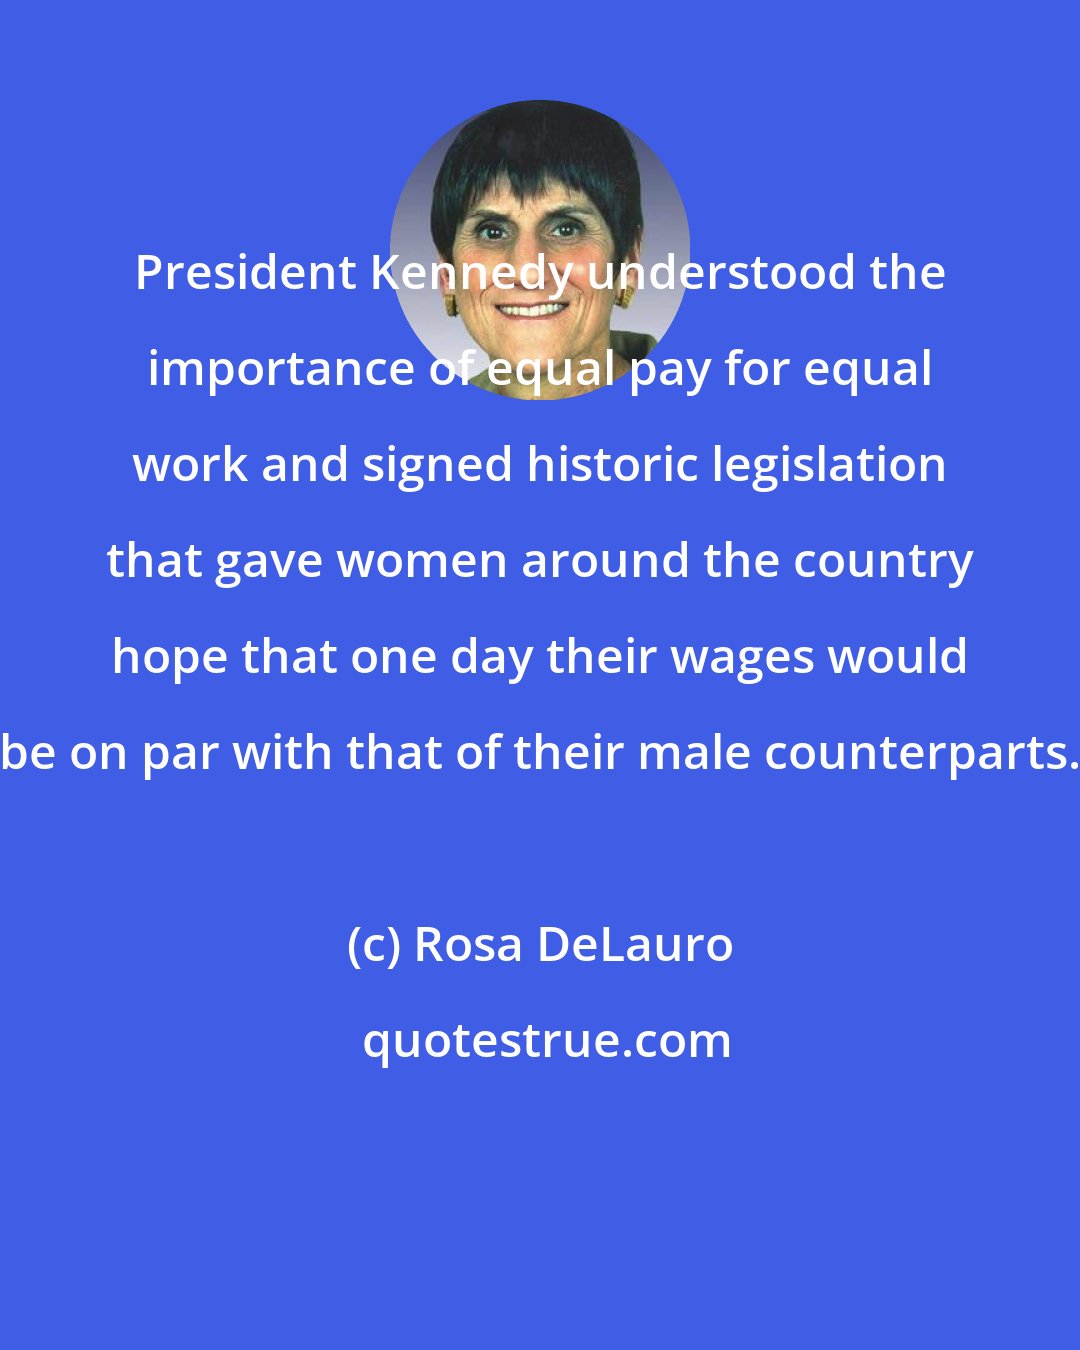 Rosa DeLauro: President Kennedy understood the importance of equal pay for equal work and signed historic legislation that gave women around the country hope that one day their wages would be on par with that of their male counterparts.